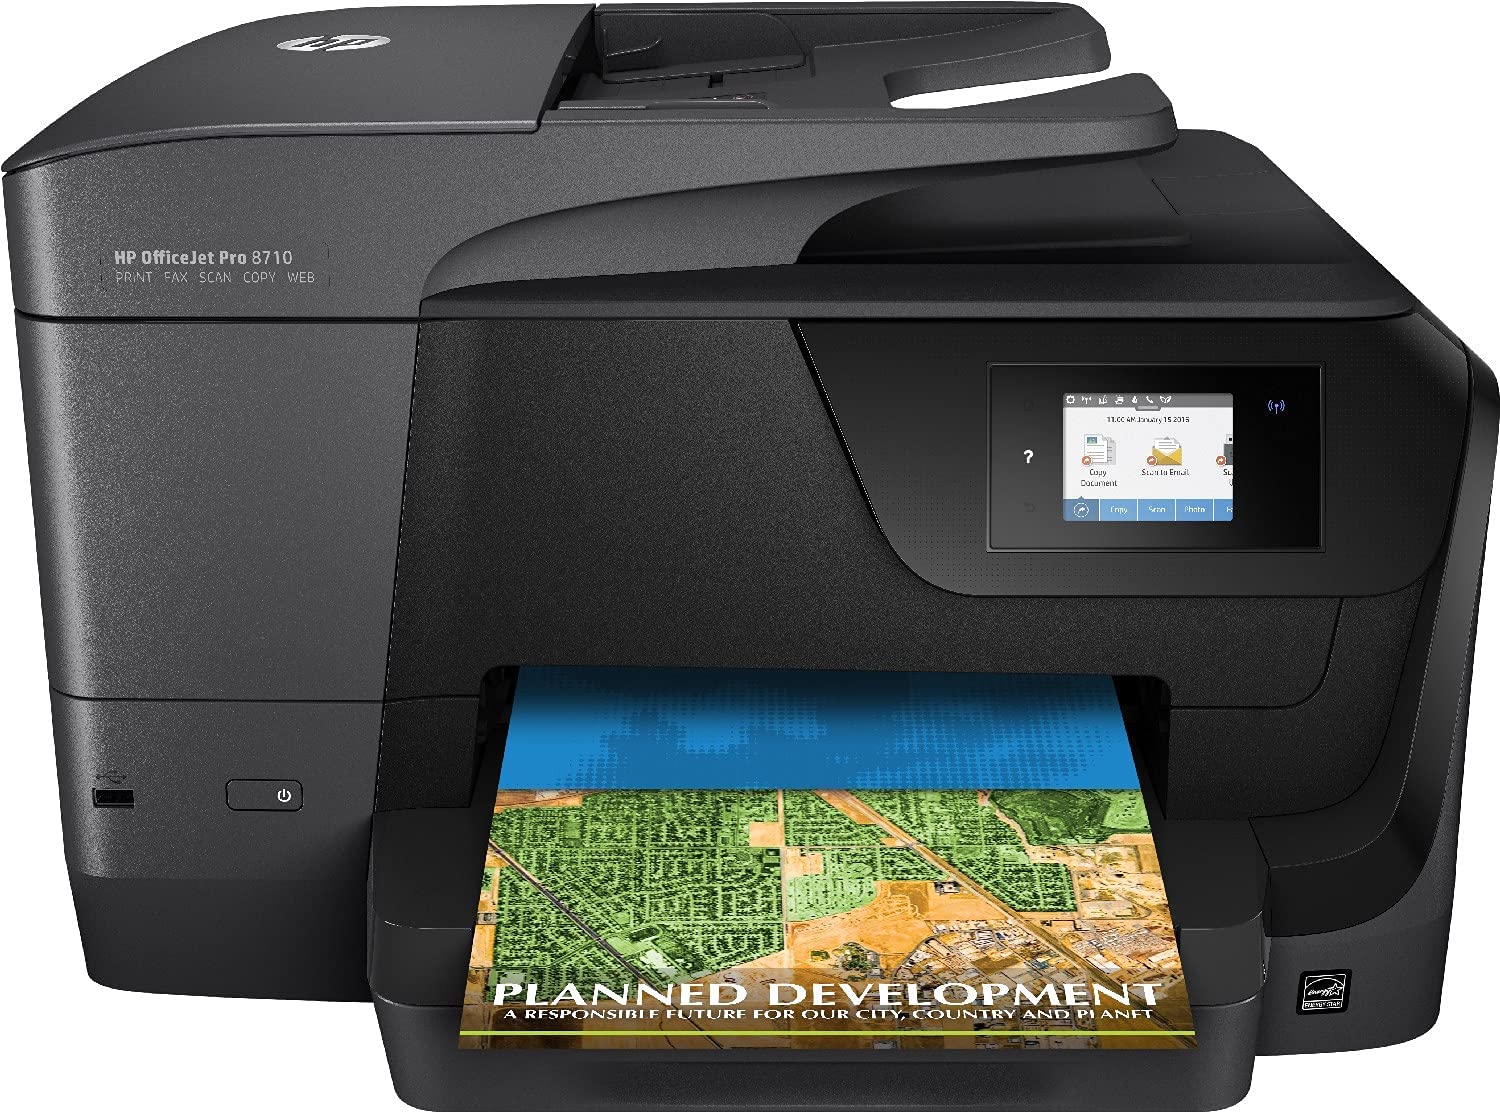 How to Install HP OfficeJet Pro 8710/8715/8720 Ubuntu - Featured